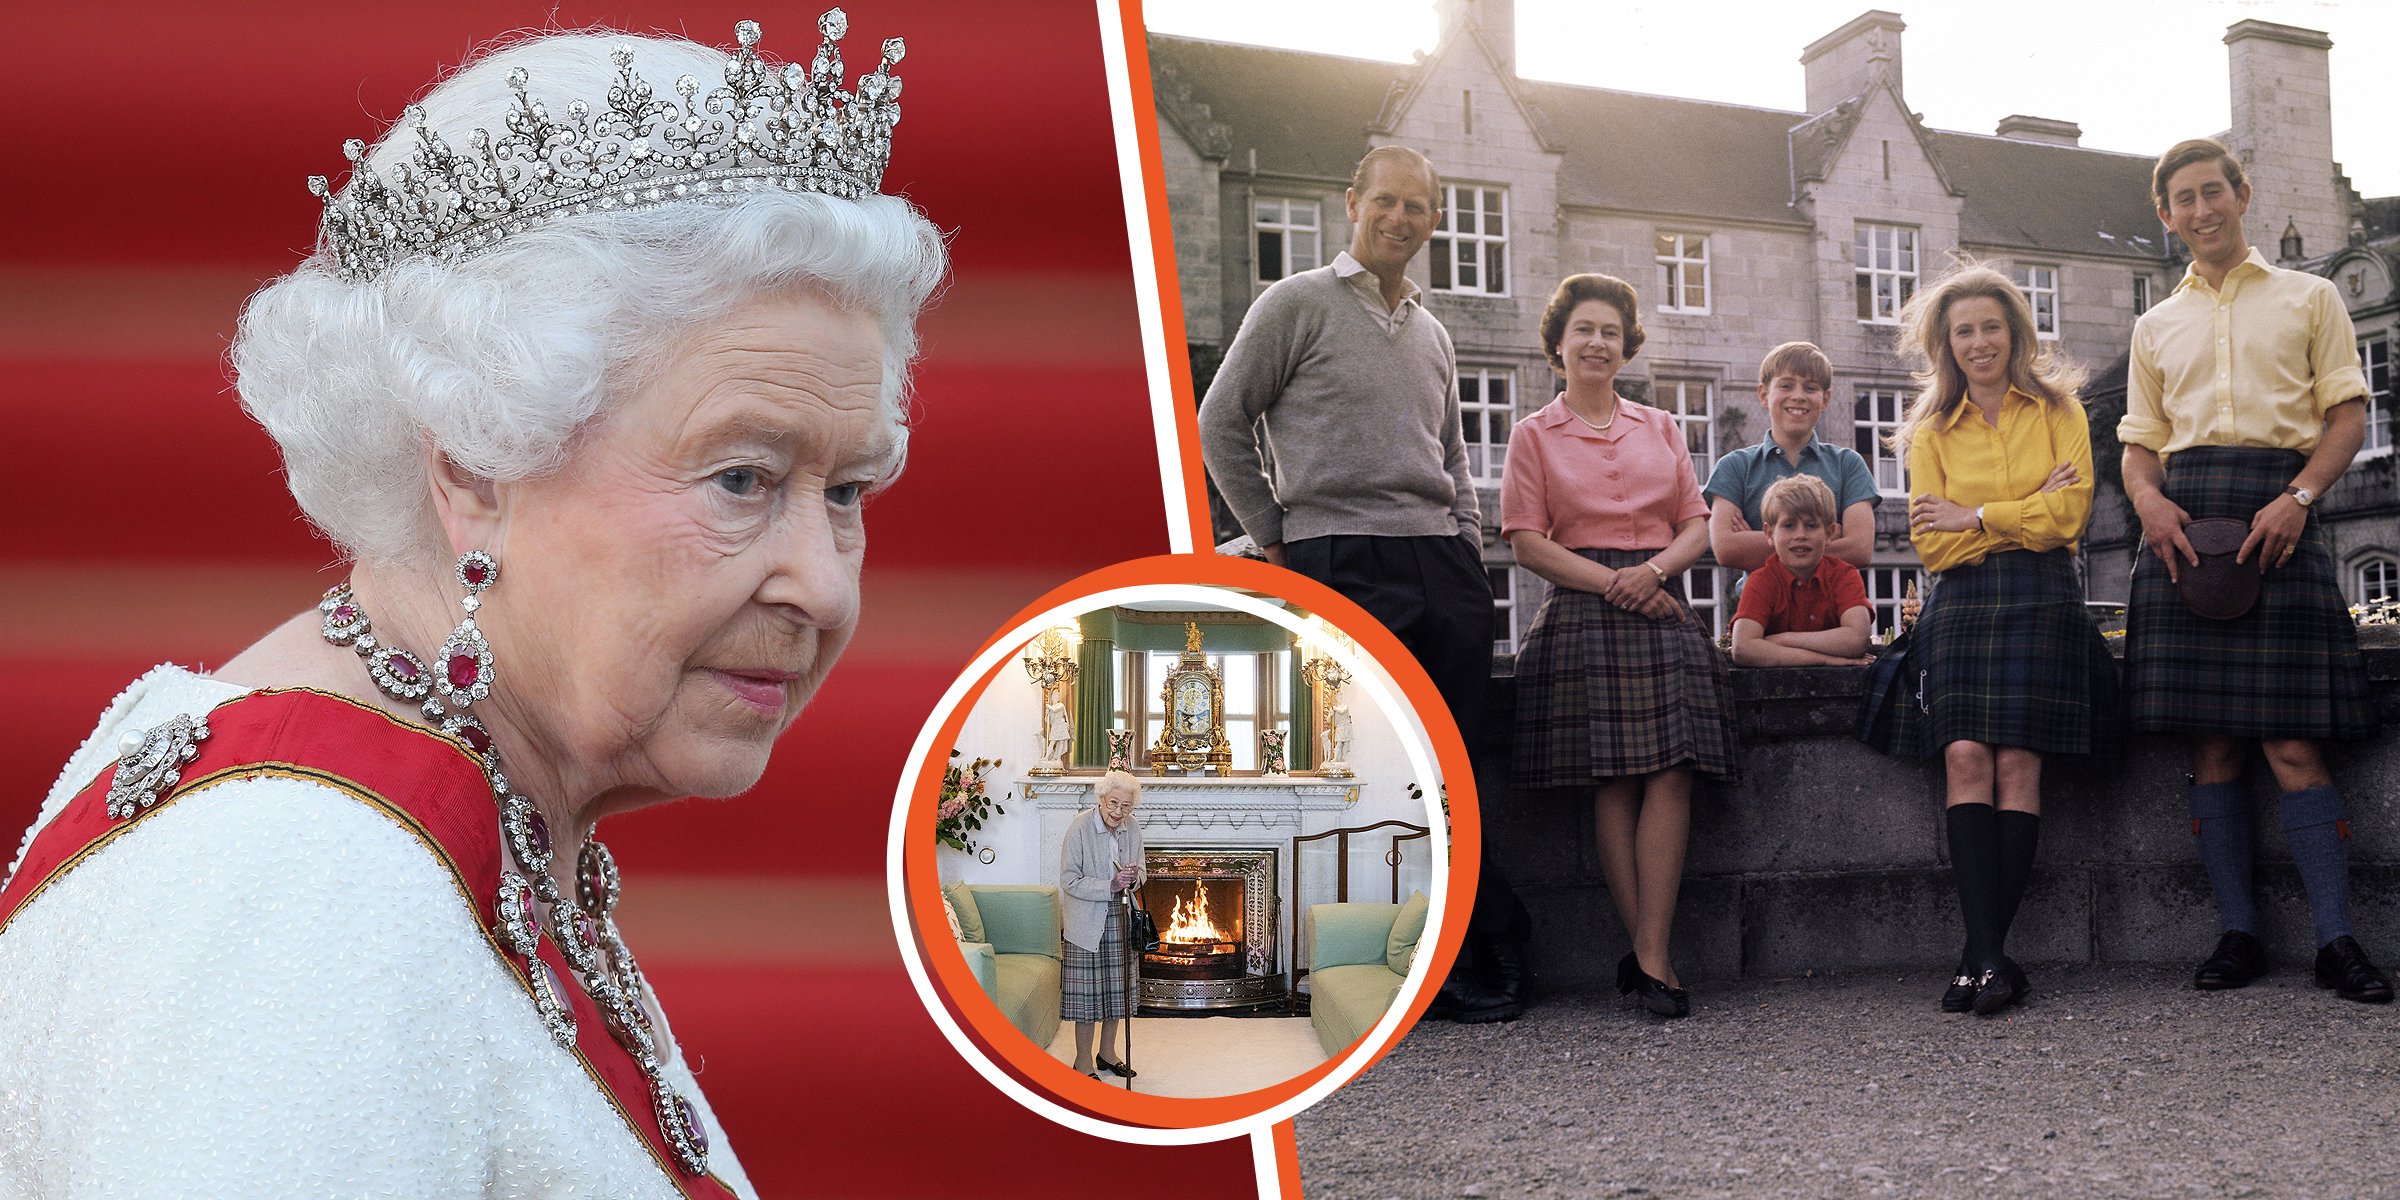 Her Majesty the Queen | The Royal Family at Balmoral | Source: Getty Images